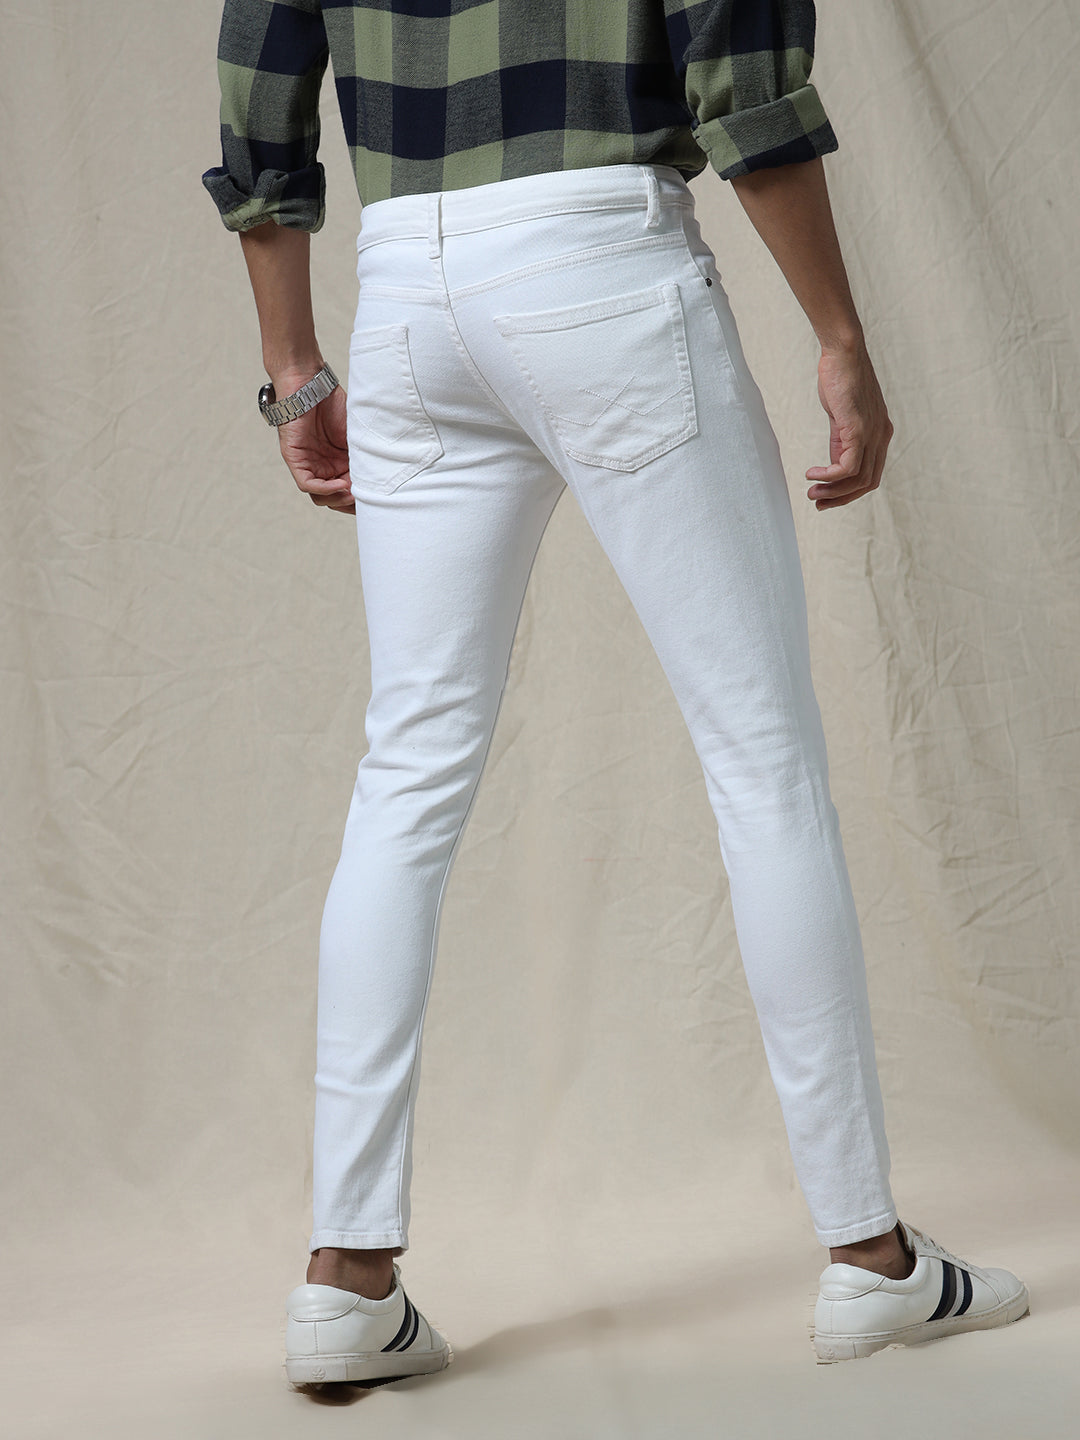 Casual Core White Jeans